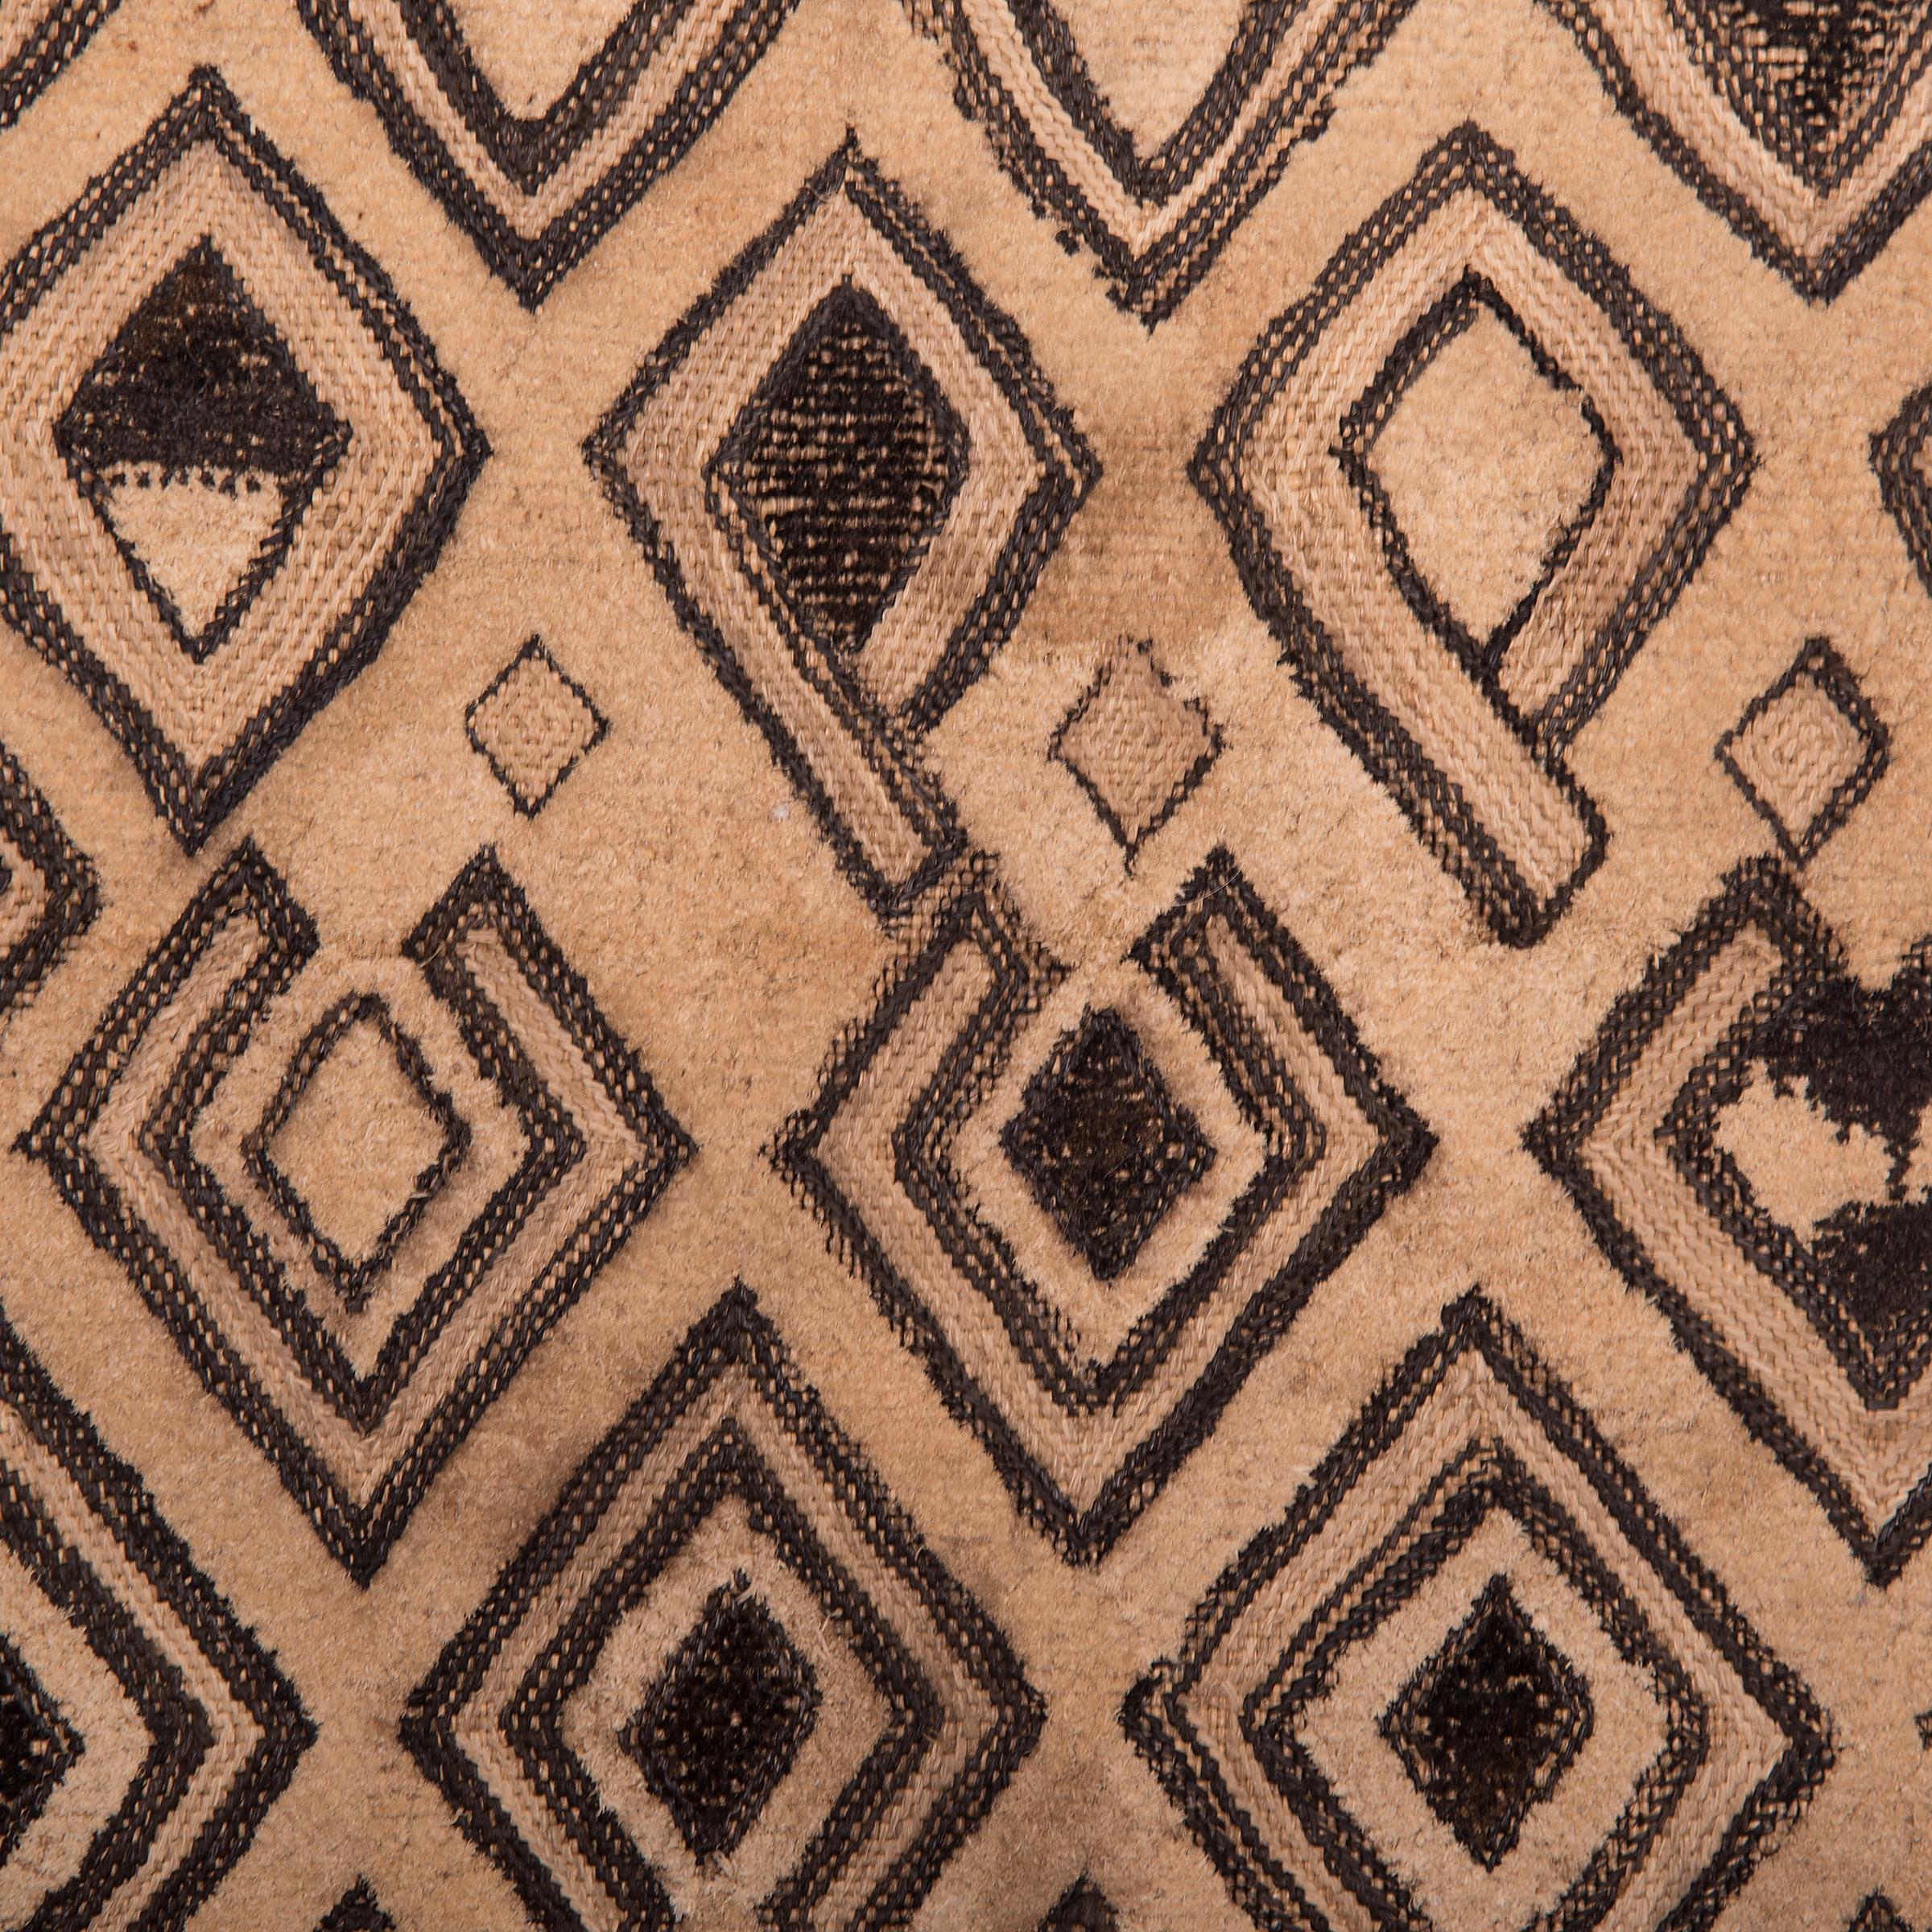 Visually dynamic and highly textured, this raffia panel expresses the irregular, geometric patterns typical of Kuba textile art. Created by an artisan of the Kuba People of the Democratic Republic of the Congo, this form of woven textile is made by